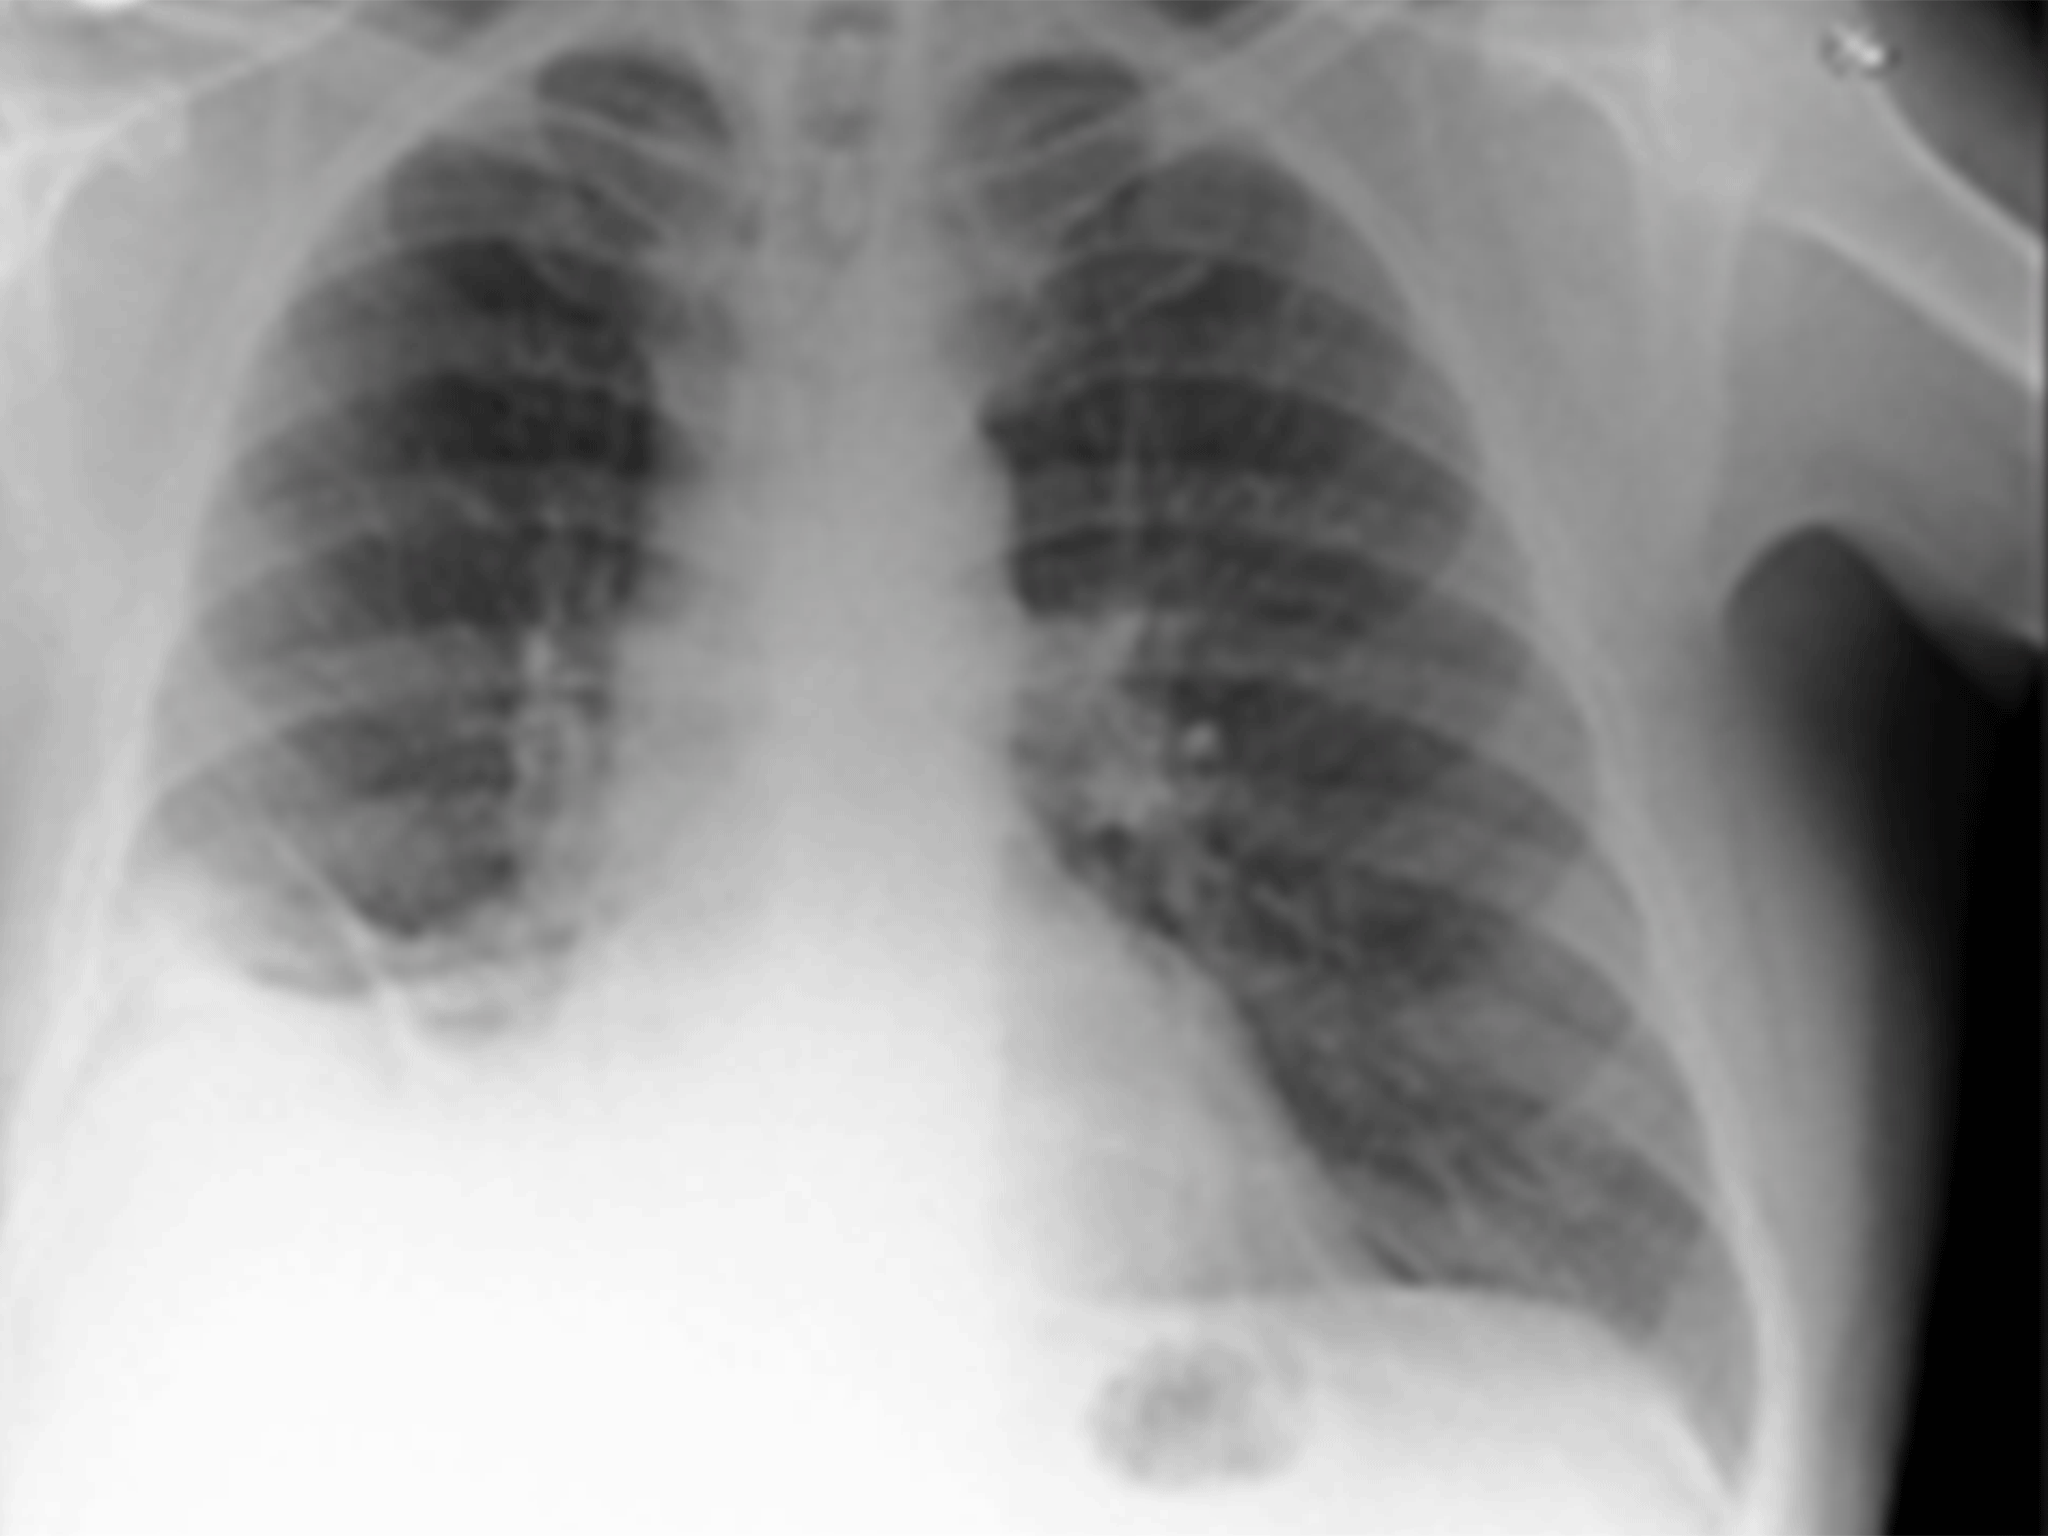 Doctors believed the mass in the bottom left lung was a cancerous tumour